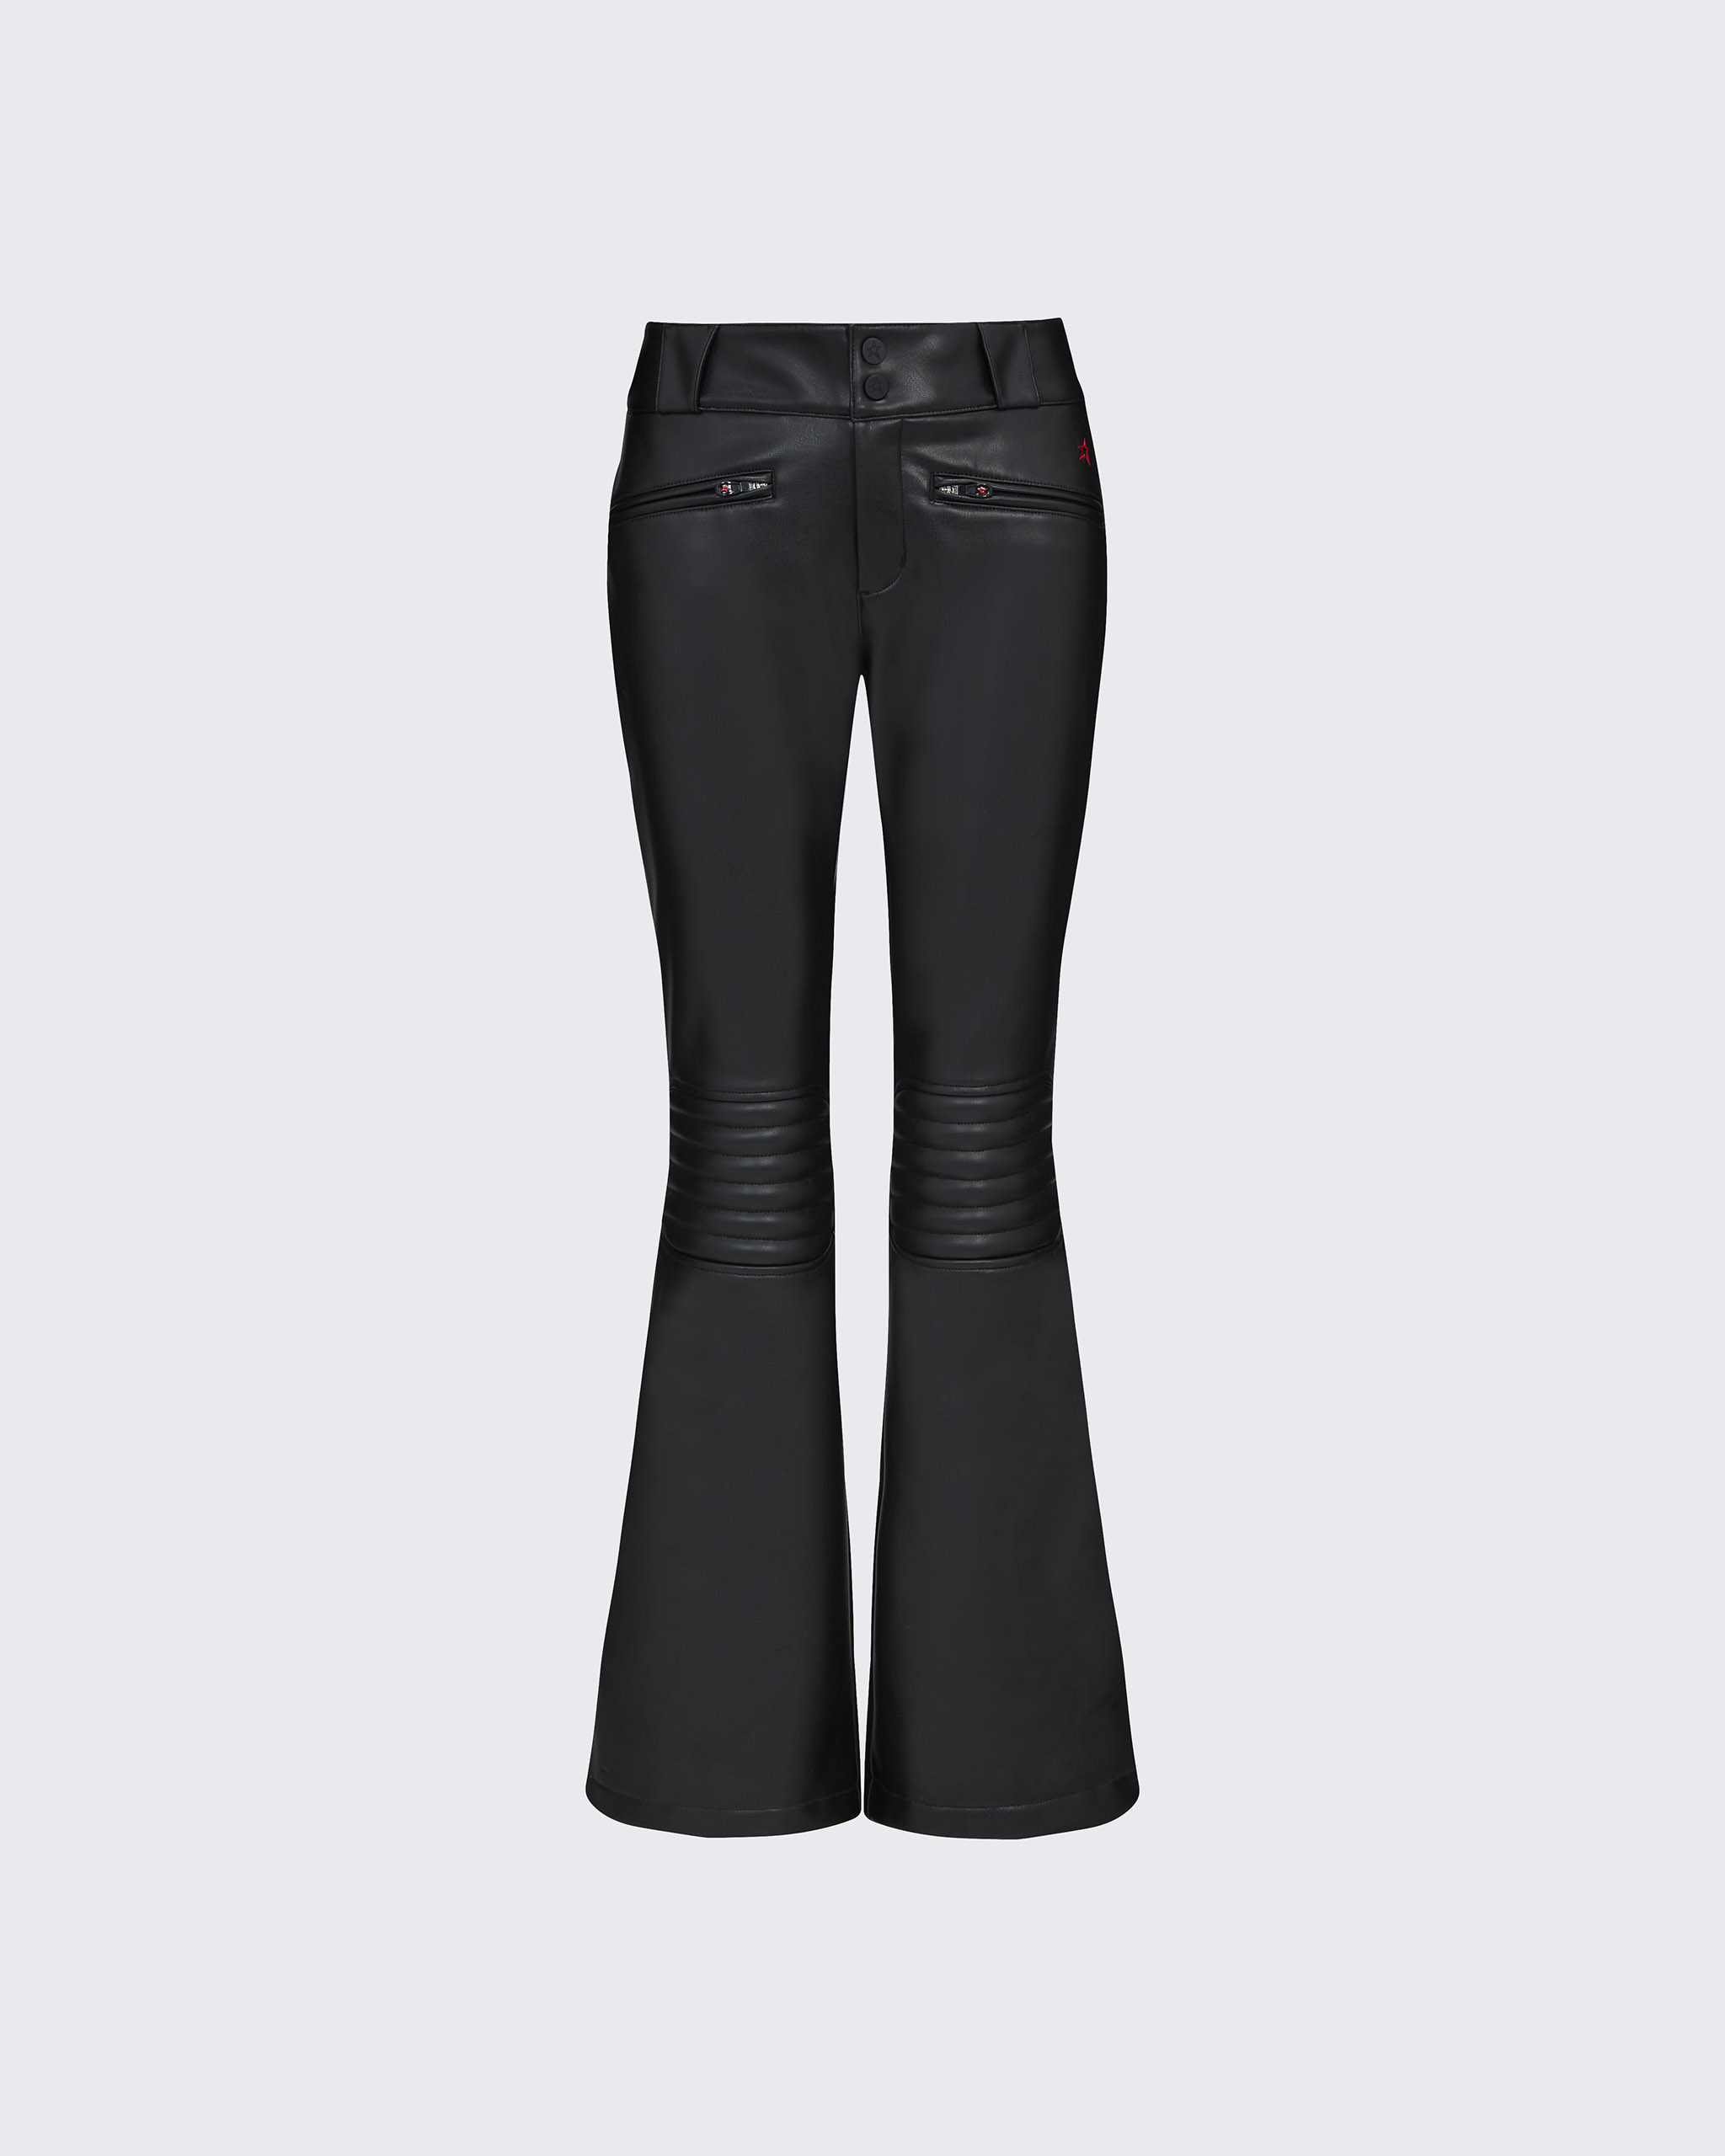 ON DUTY FAUX LEATHER HIGH RISE FLARE PANTS